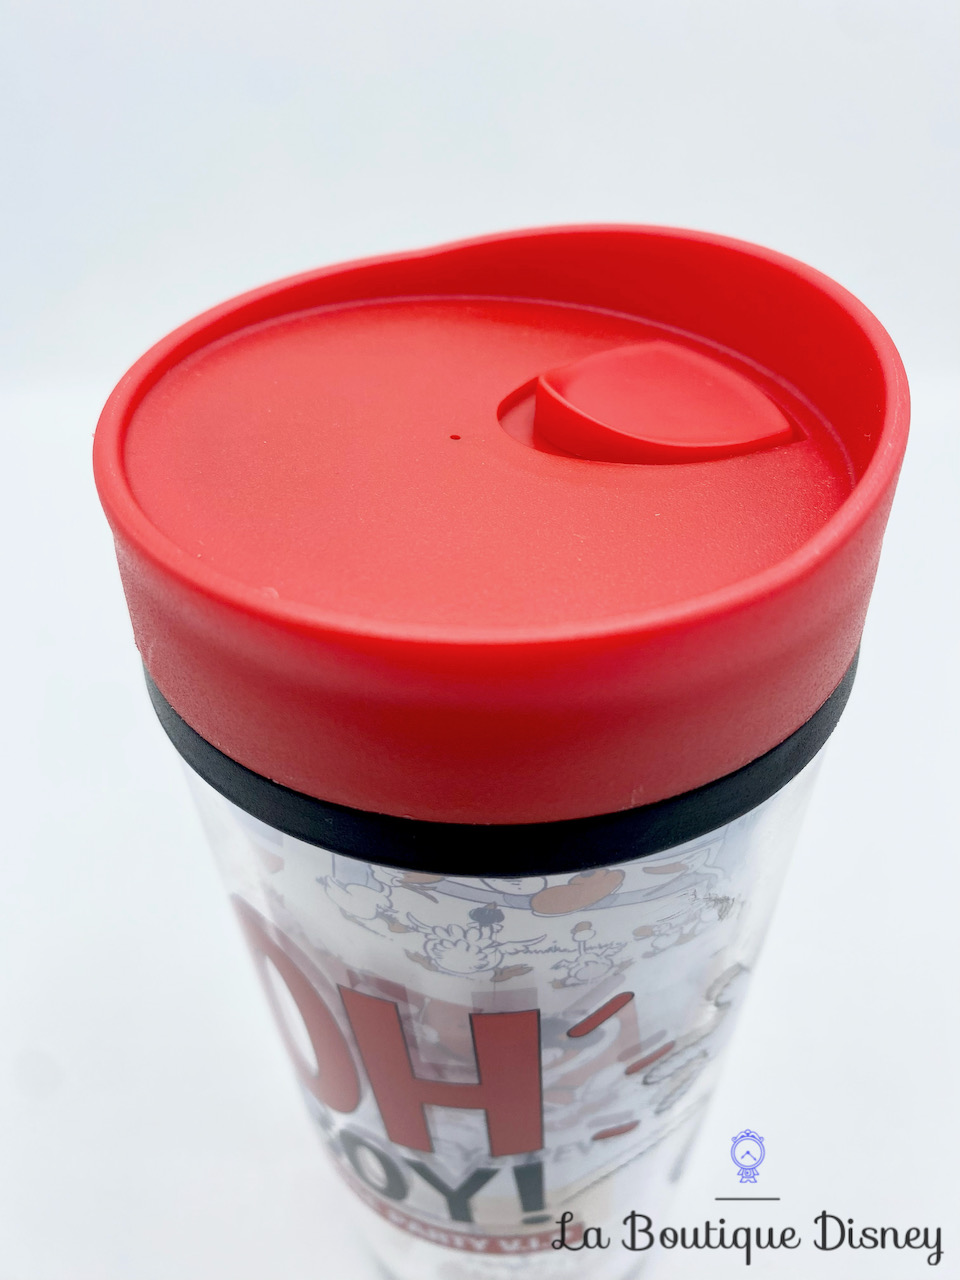 thermos-mickey-mouse-oh-boy-mouse-party-vip-disneyland-paris-mug-voyage-disney-rouge-7